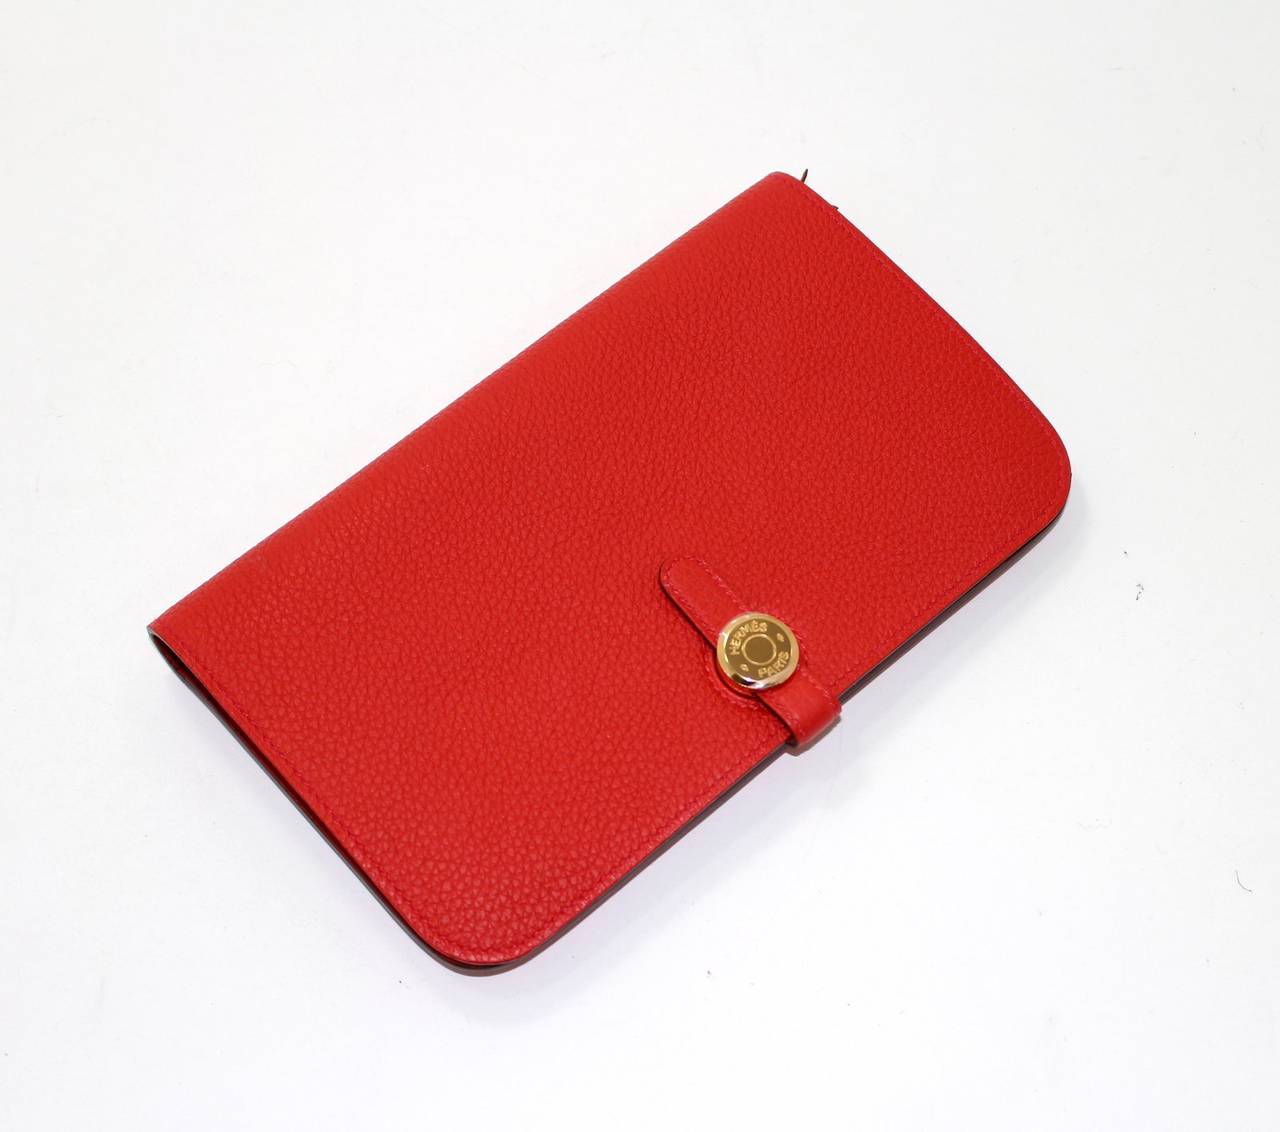 Hermès Vermillion Red Togo Leather Dogon Combined Wallet has never been carried.  It is in store fresh condition (plastic on hardware) and is accompanied by the original tissue and box.
Togo leather (grainy and scratch resistant calf hide)